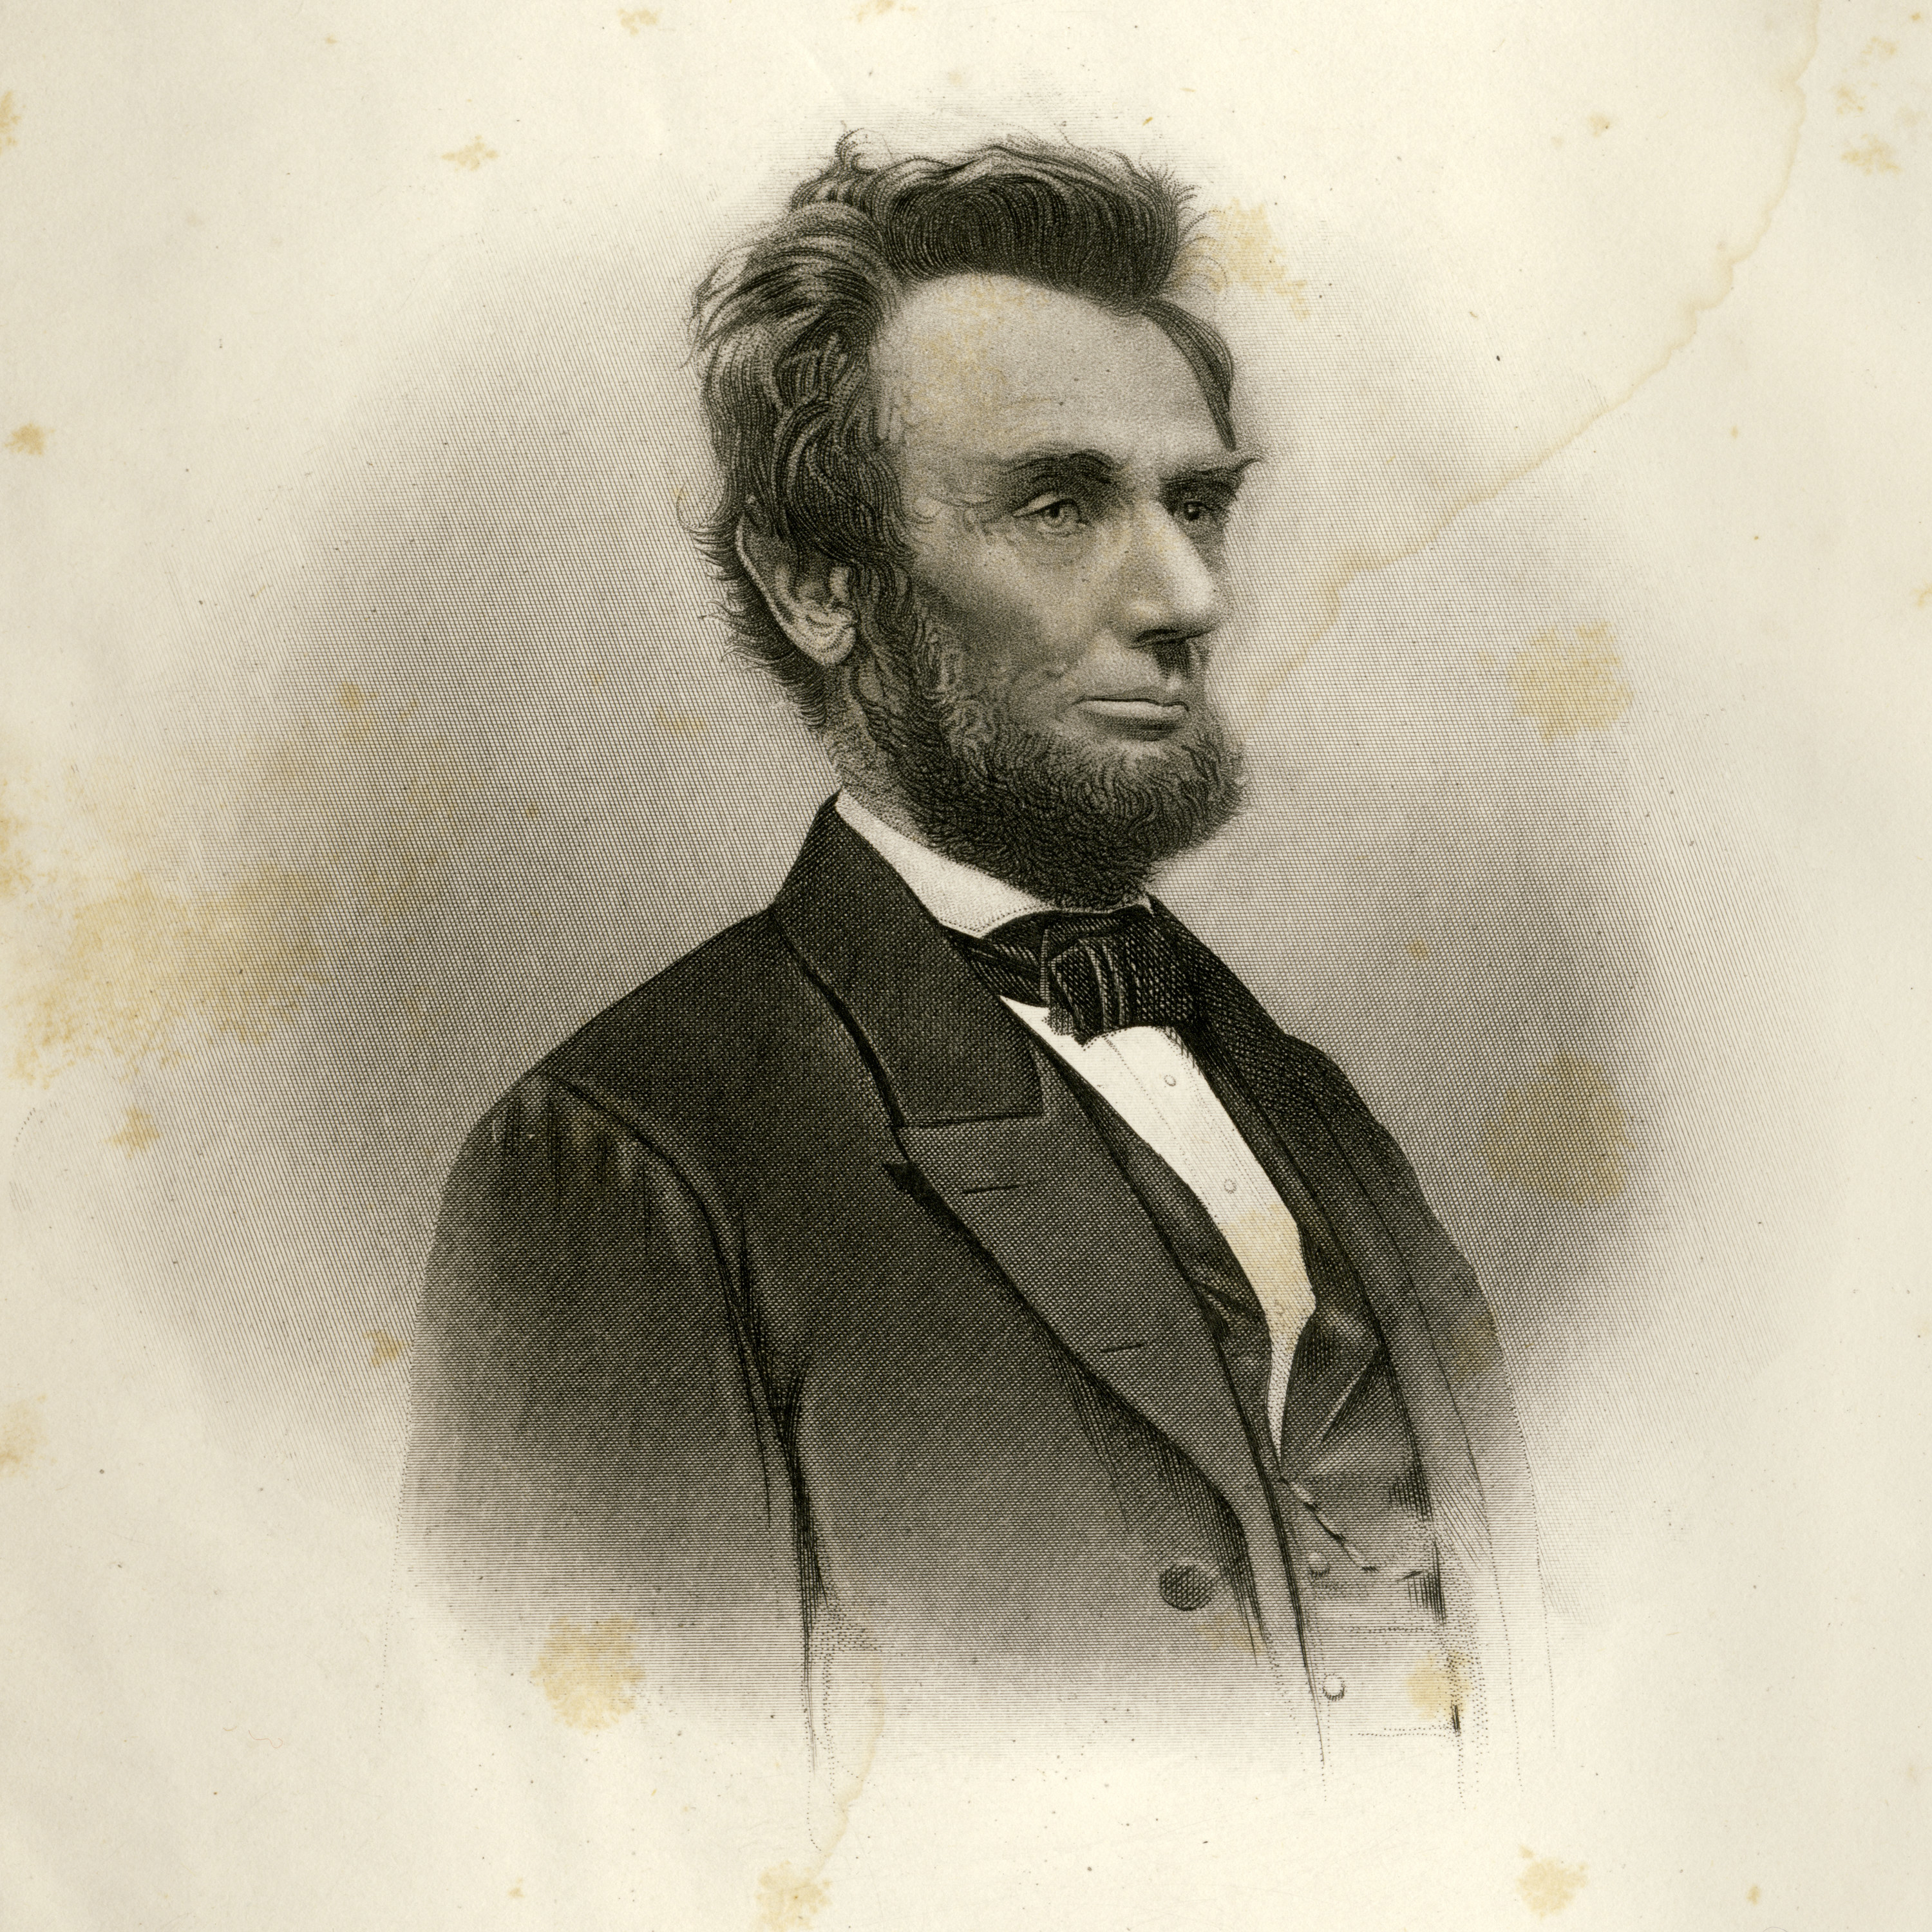 A drawing of Abraham Lincoln